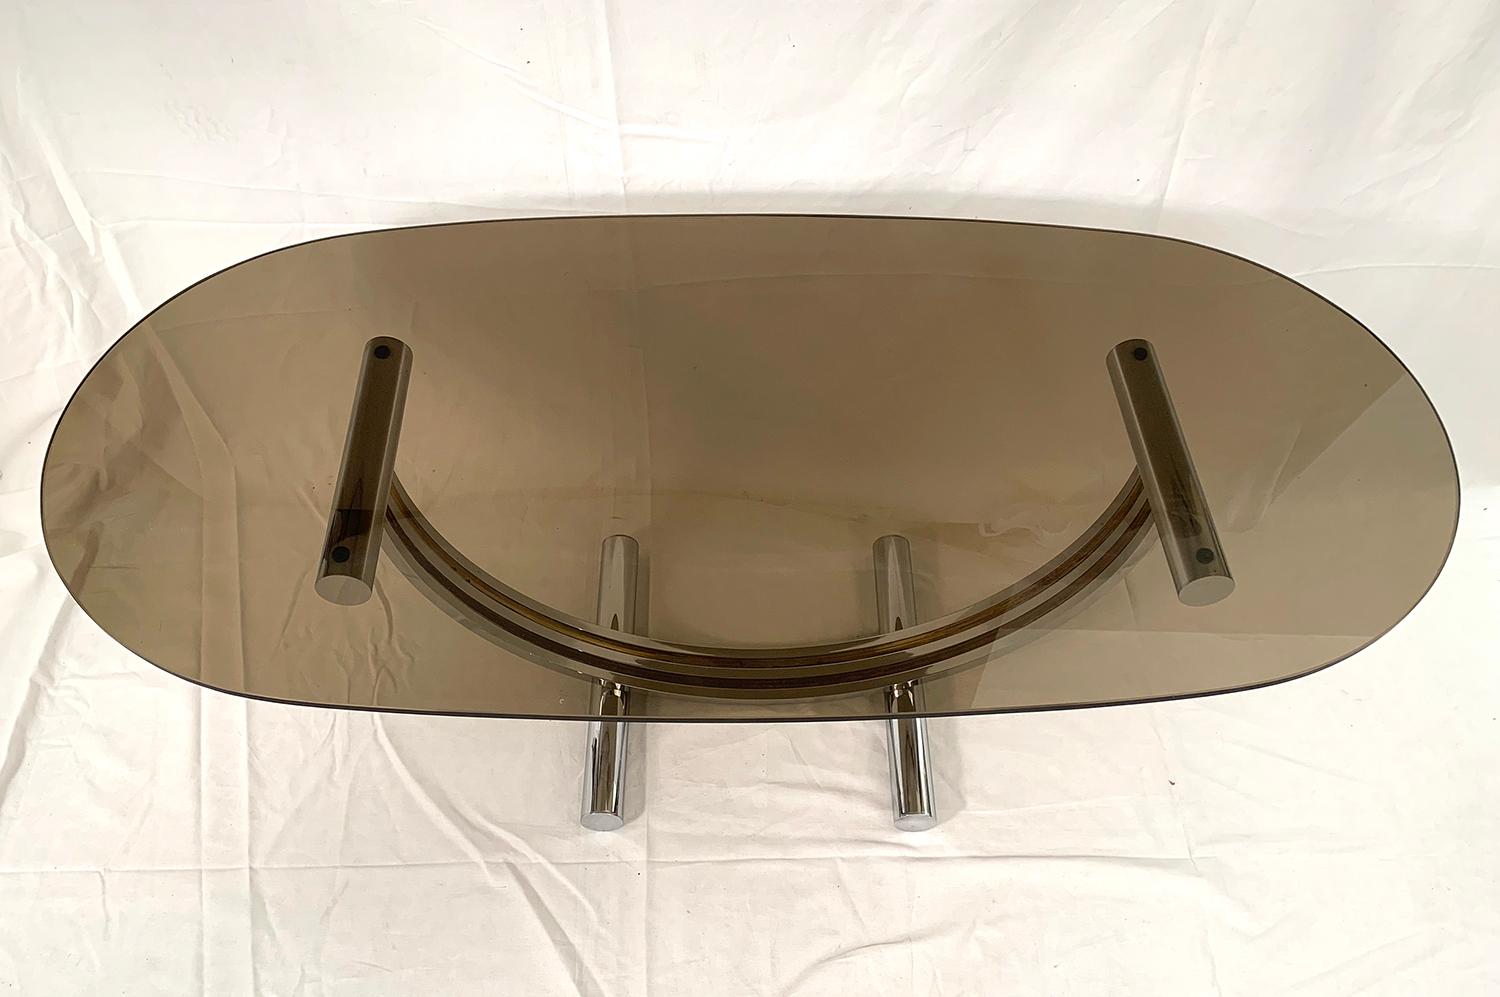 Very beautiful coffee table attributed to Romeo Rega, 1970s. The curved arc tubular base features a brass and chrome striped design with a glass top.

Très belle table de salon attribuée à Romeo Rega, 1970s. La base tubulaire à arc incurvé